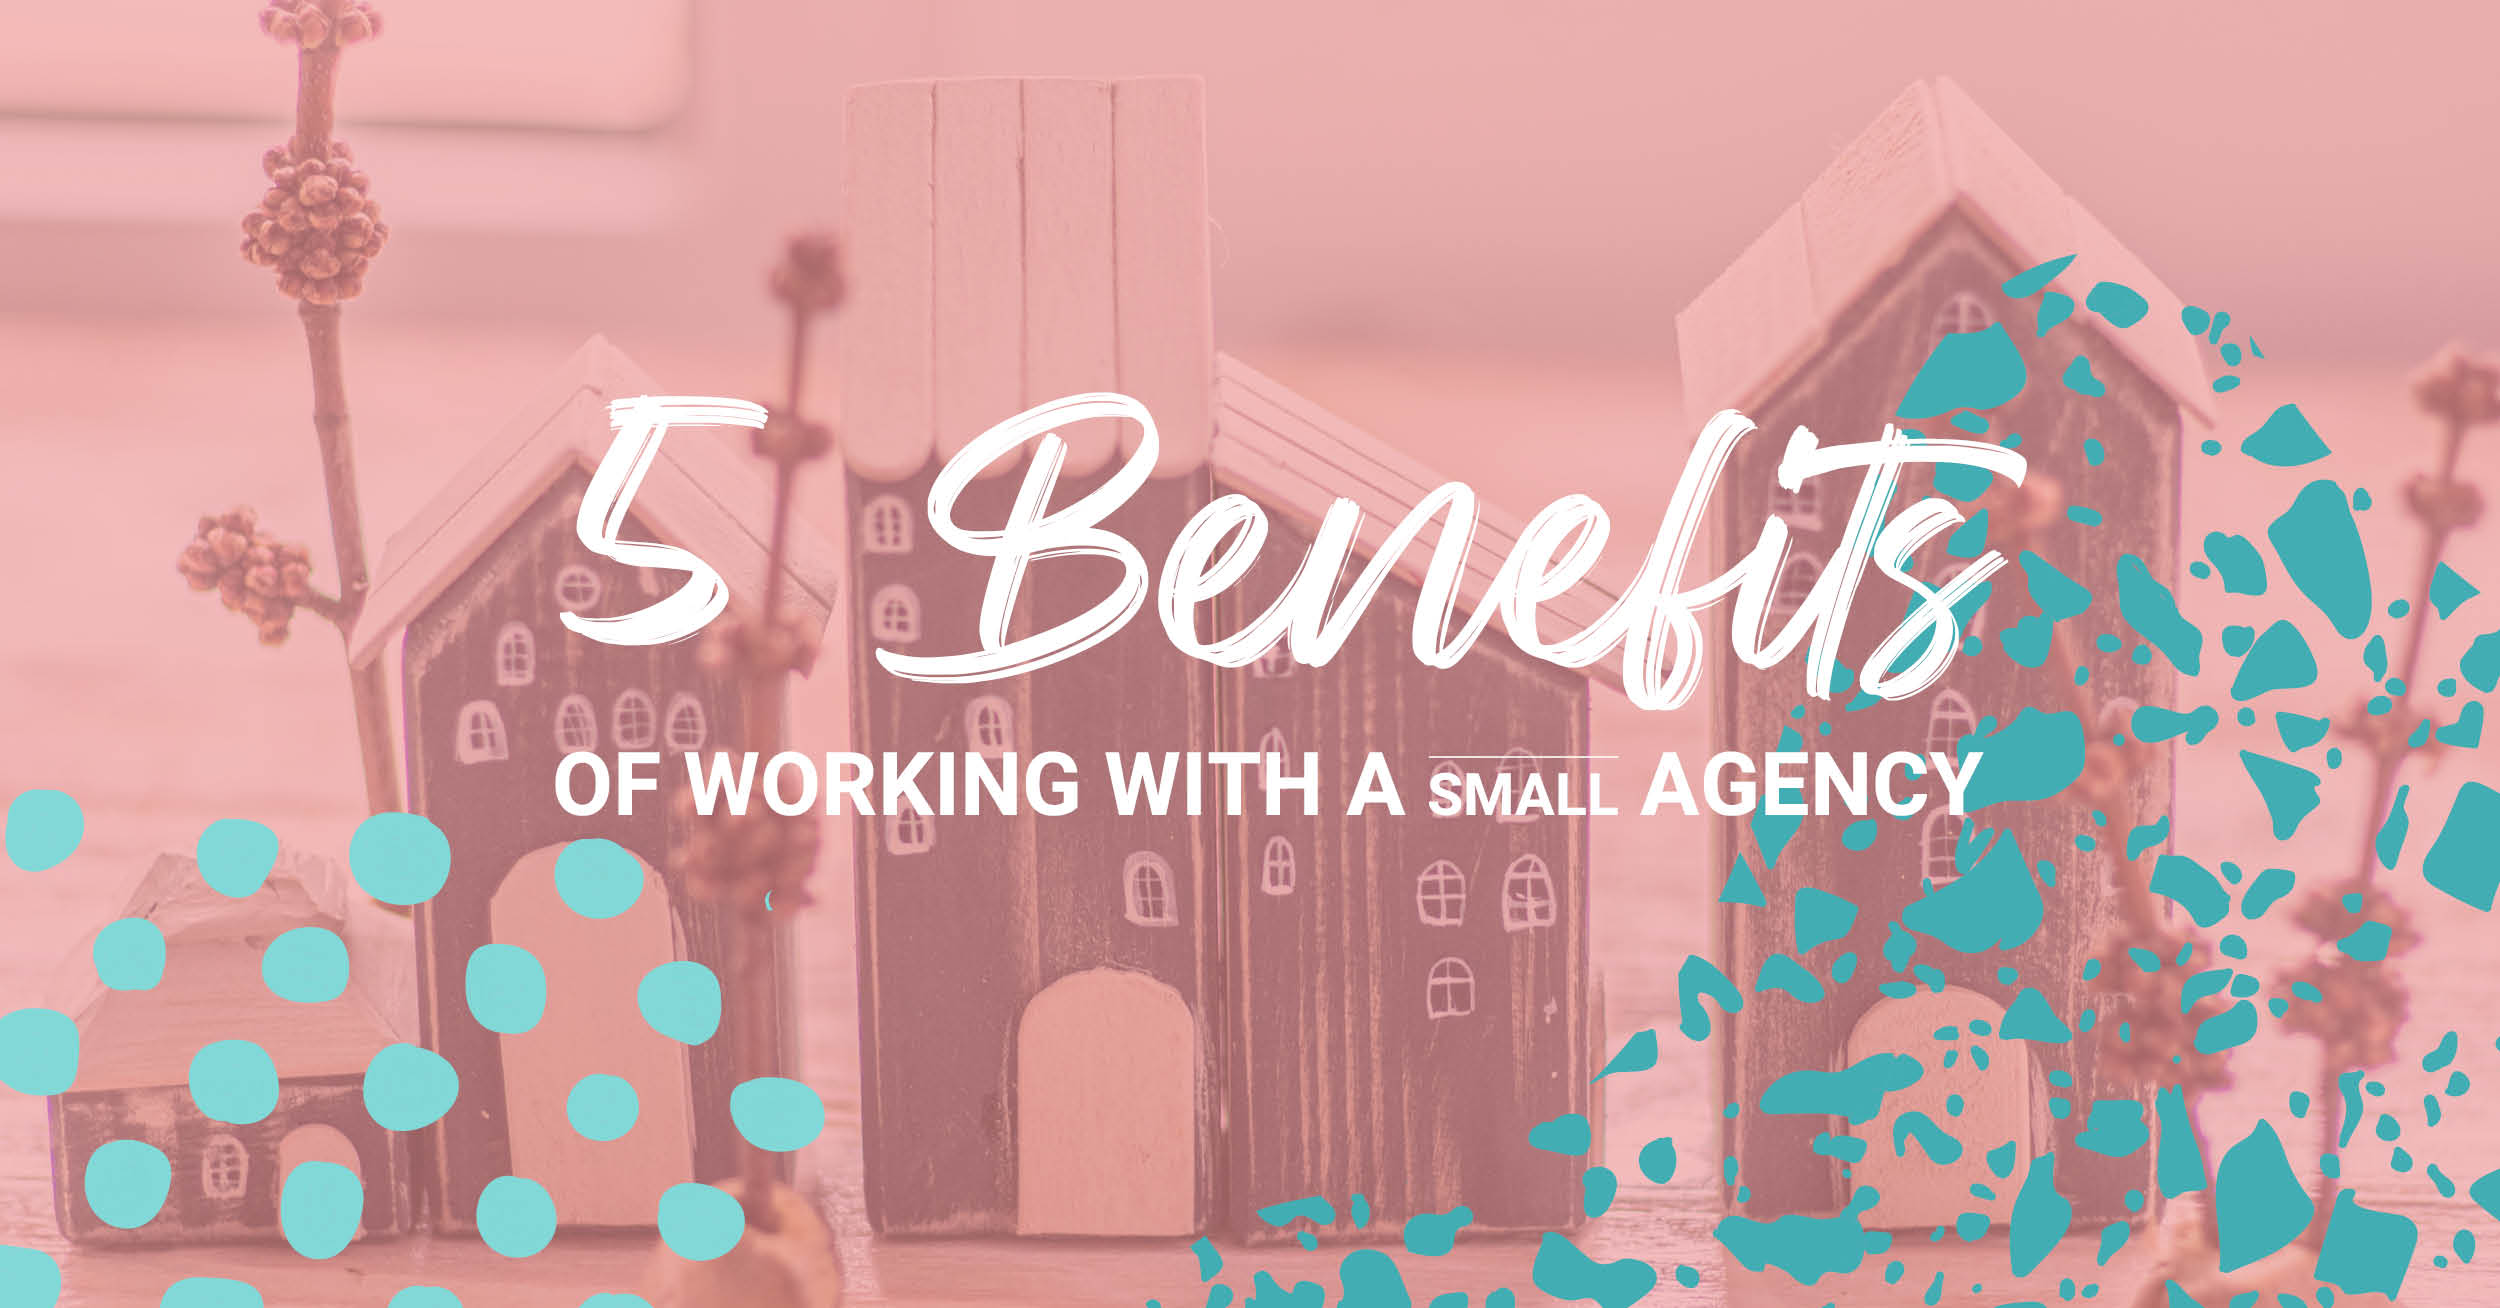 5 benefits of working with a small agency text over an image of small homes